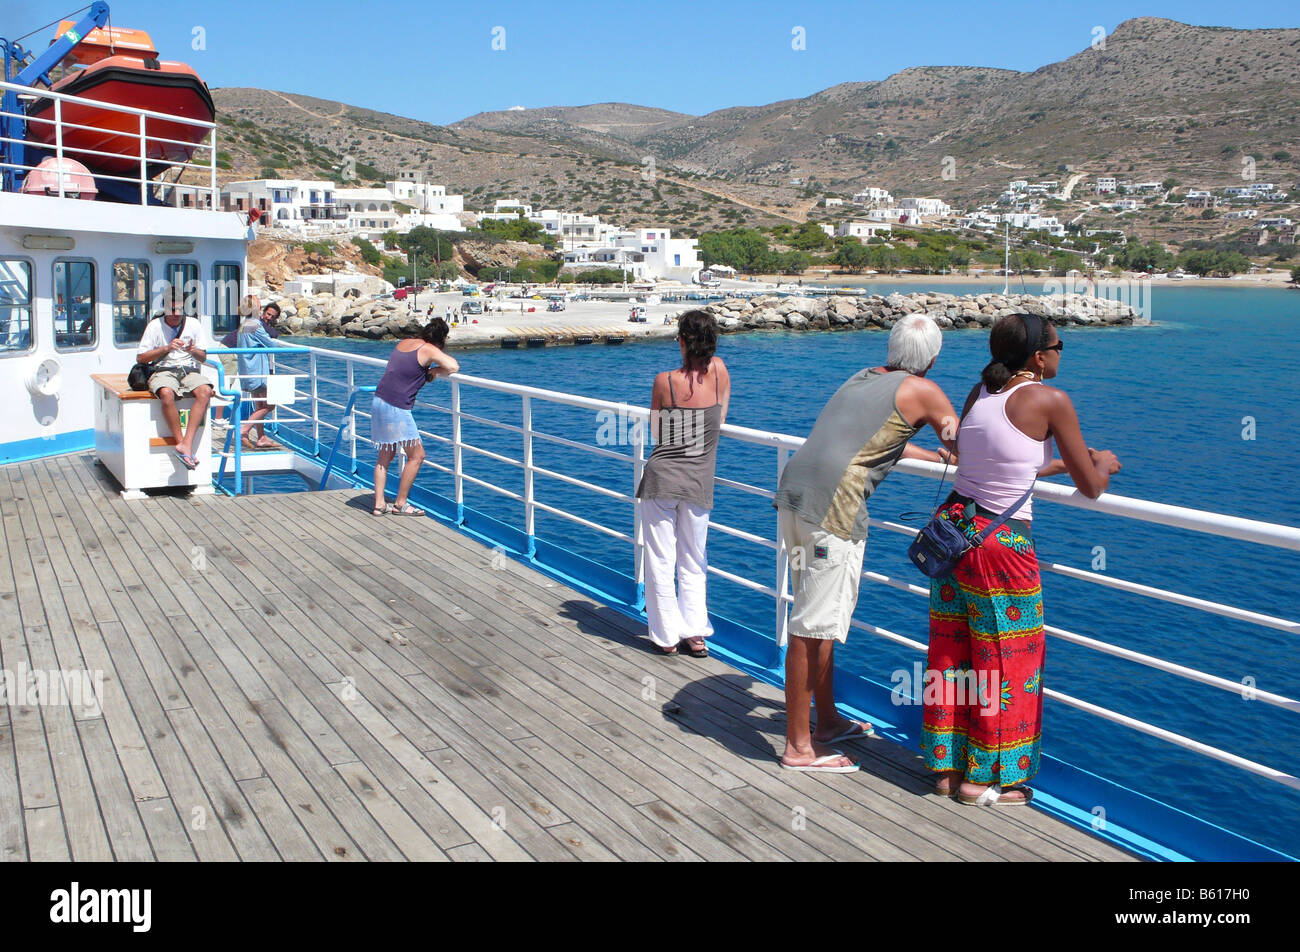 Passengers on the deck of a car ferry, Port of Folegandros, Cyclades, Greece, Europe Stock Photo